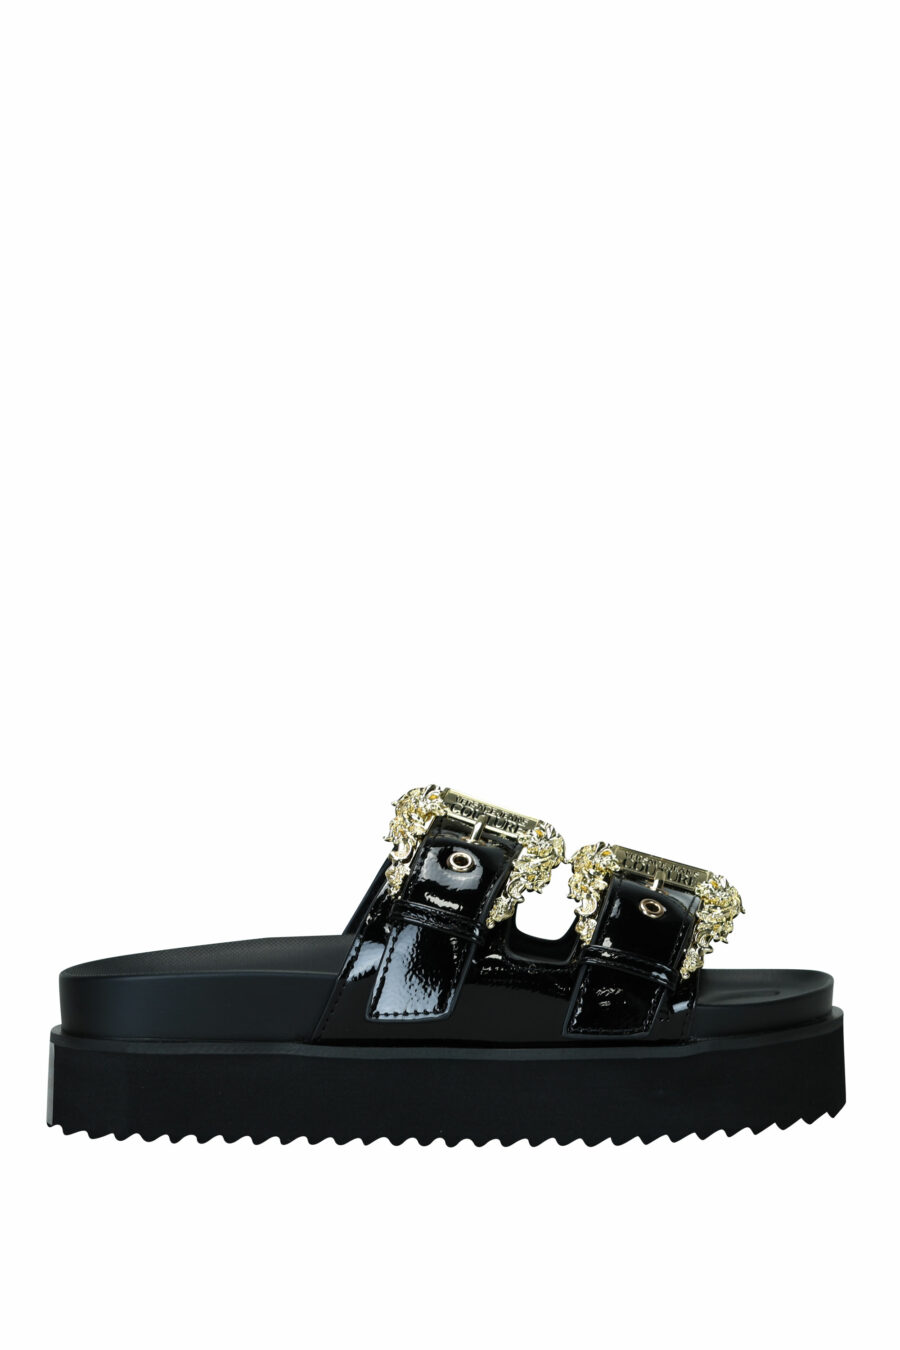 Black sandals with gold baroque double buckle - 8052019607253